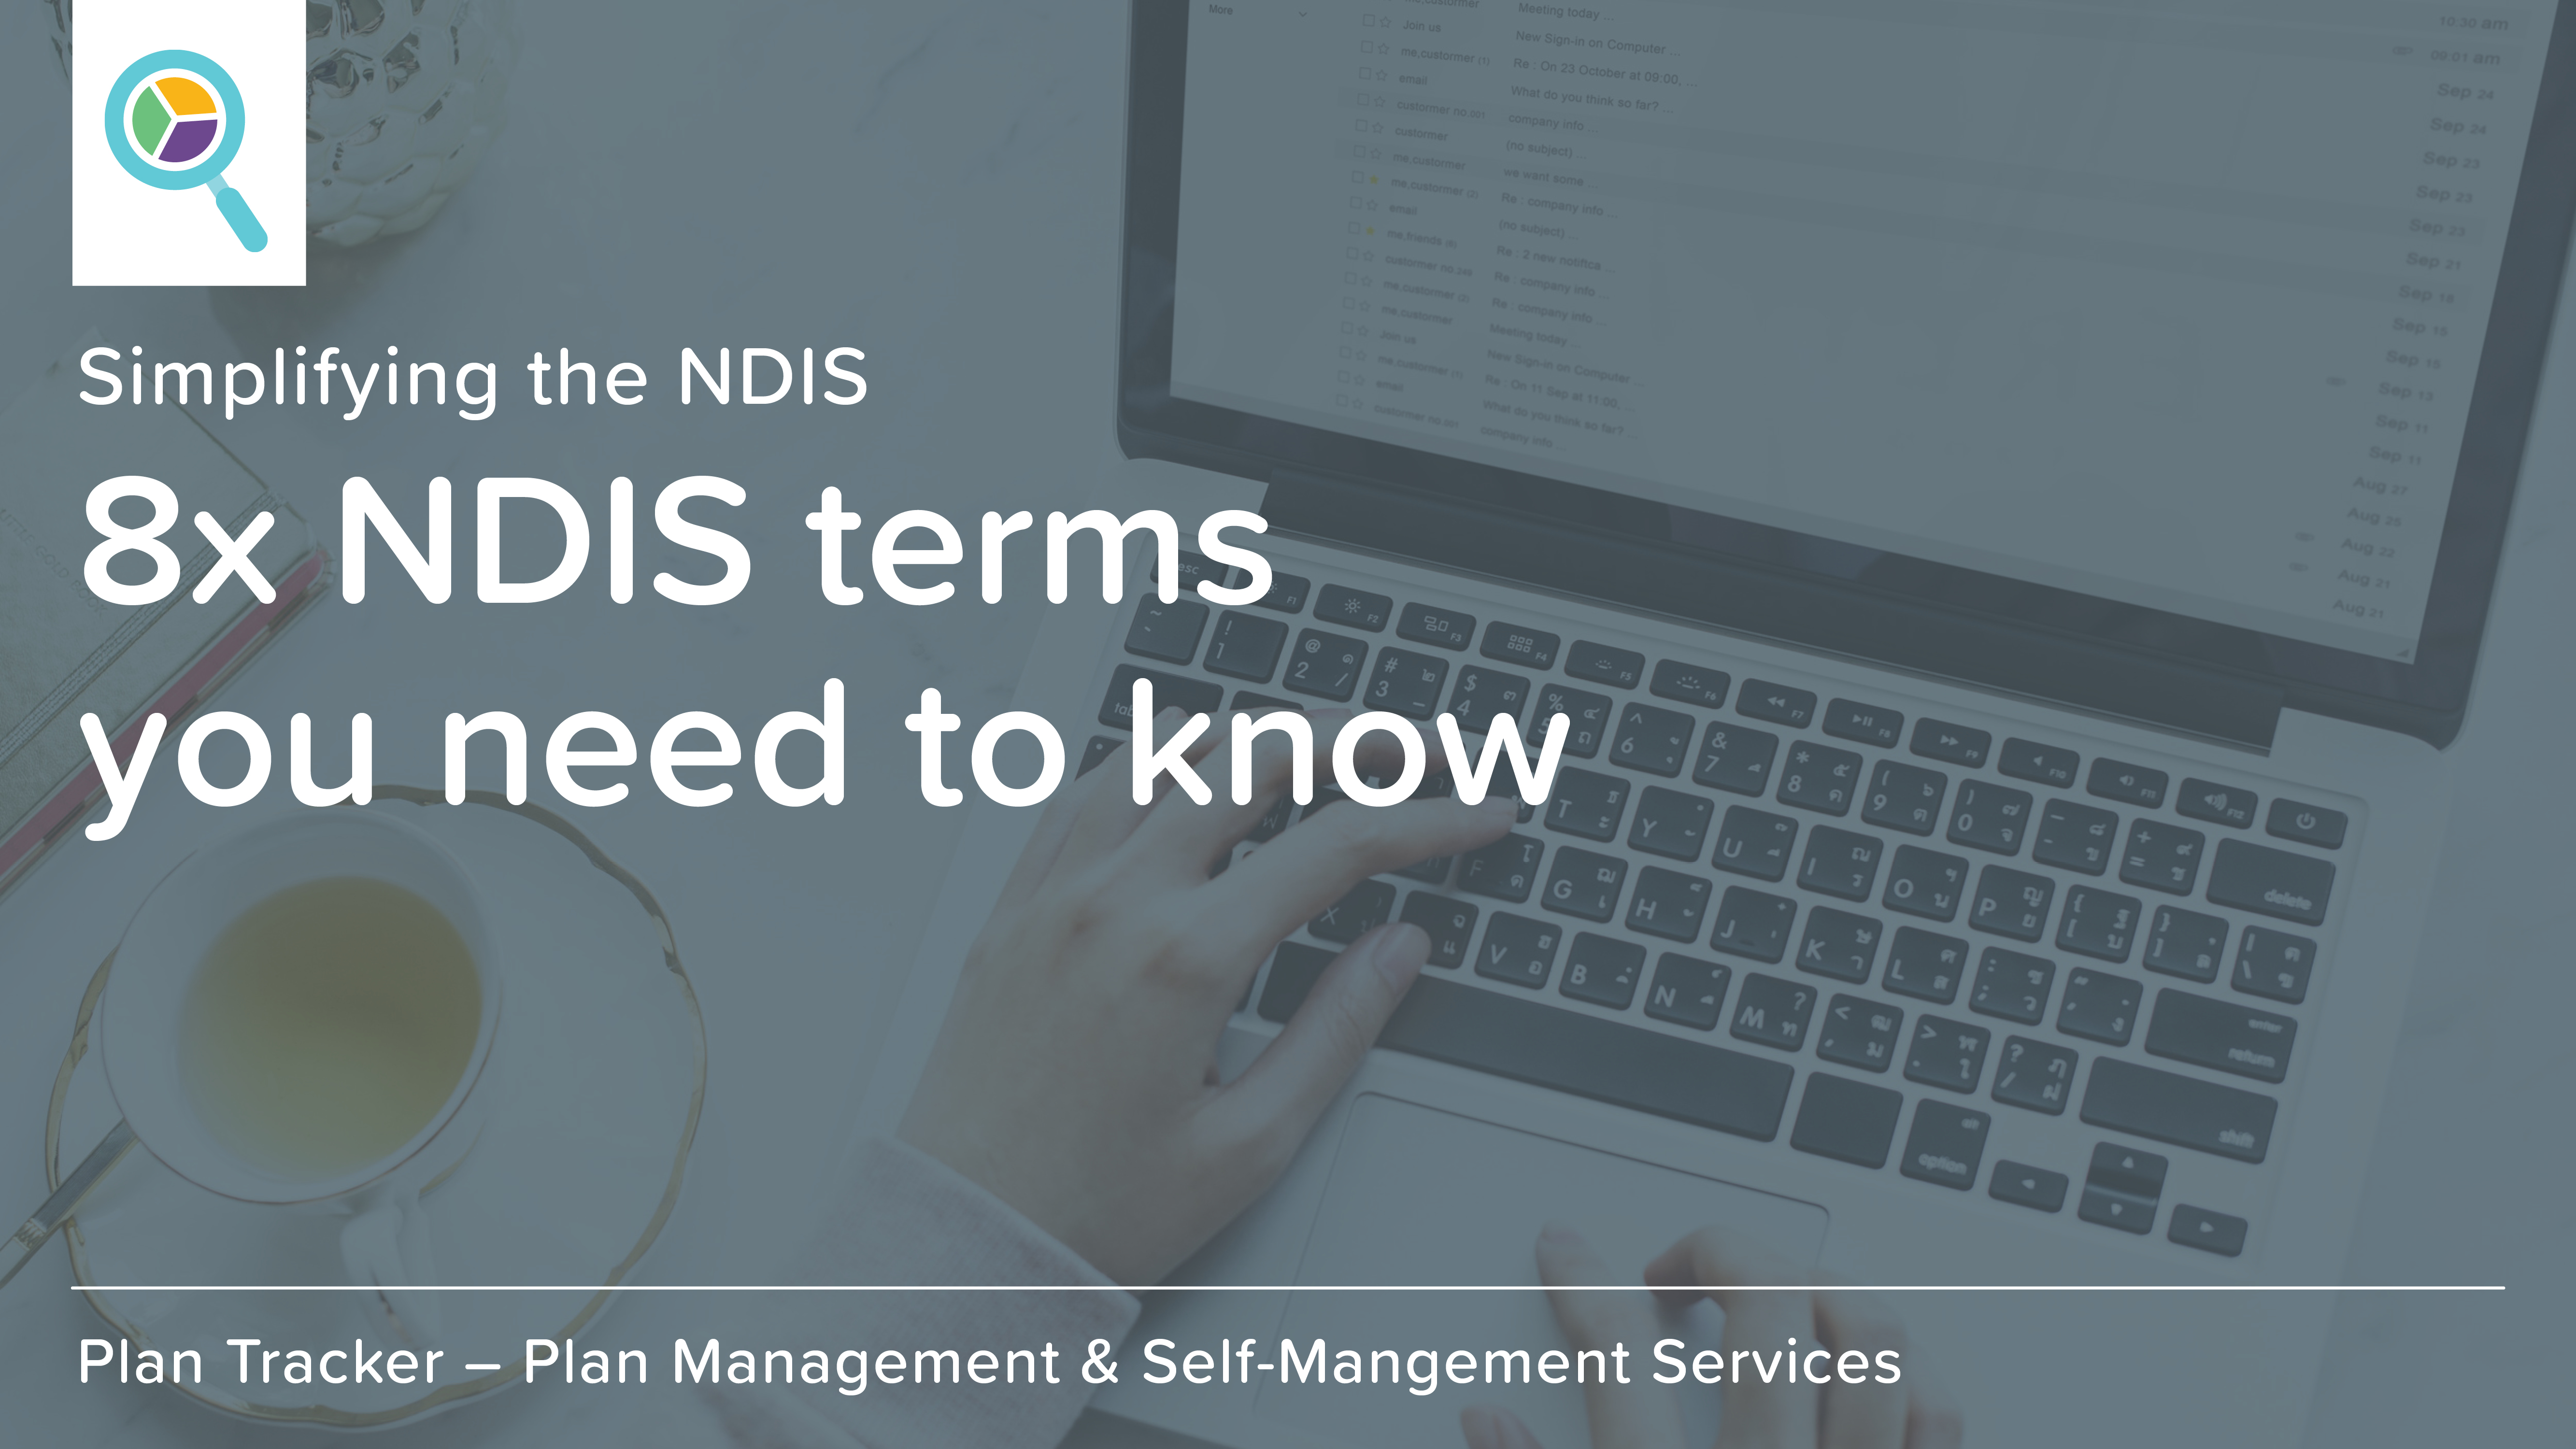 8x NDIS terms you need to know